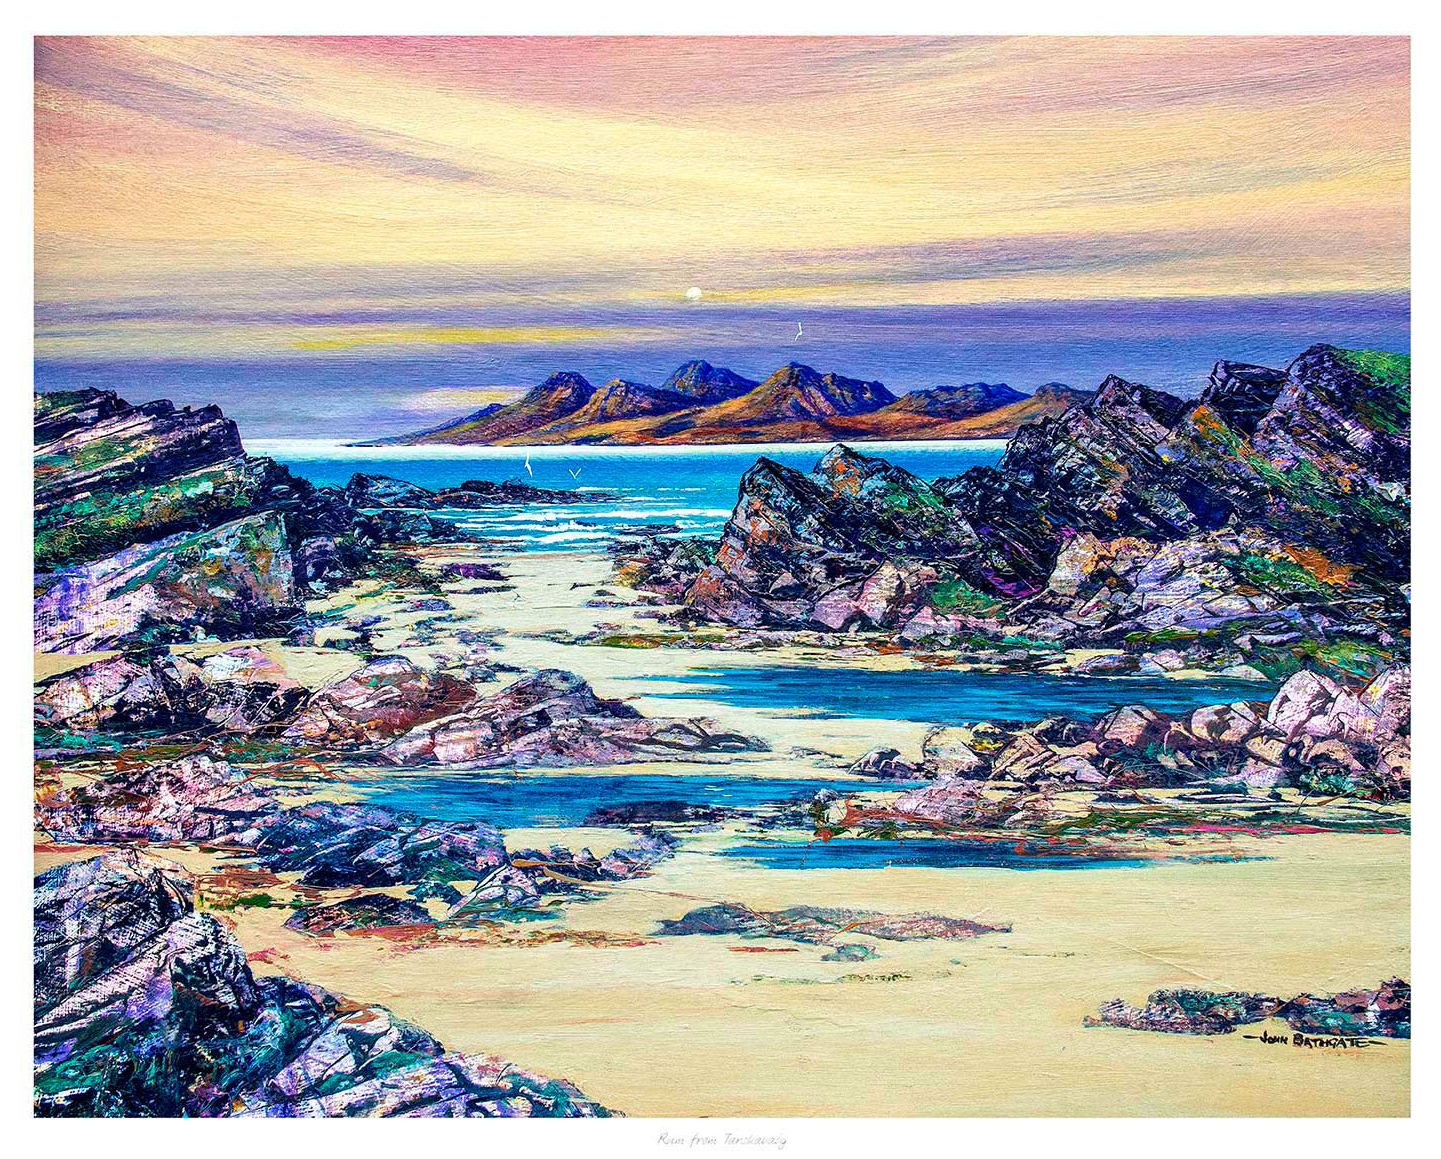 An impressionistic painting depicting a vibrant coastal landscape with rugged rocks, reflective water, distant mountains under a pastel sky. By John Bathgate